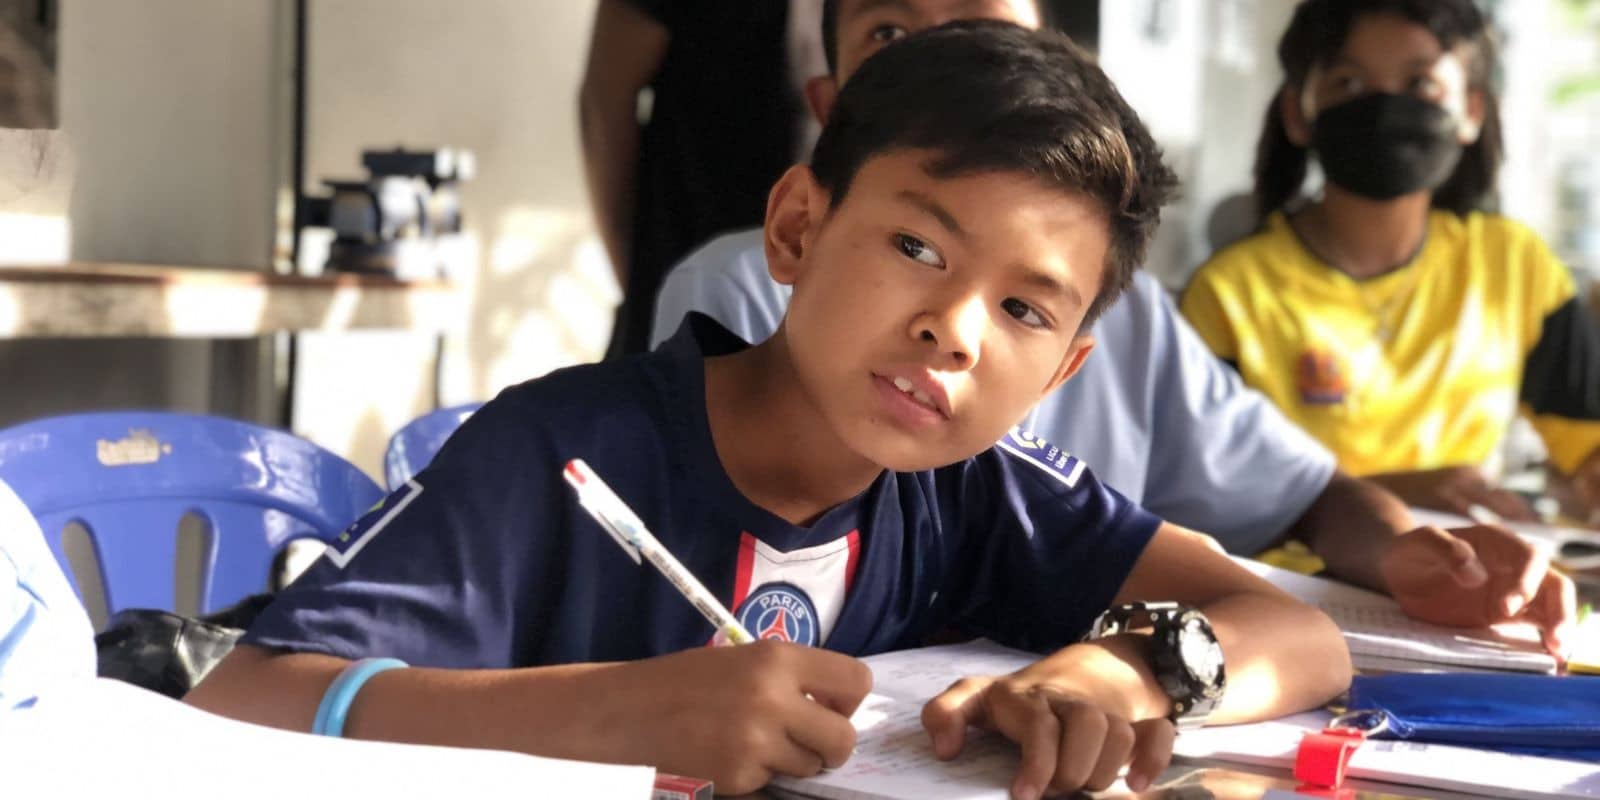 A boy is sitting at a desk with a pen and paper